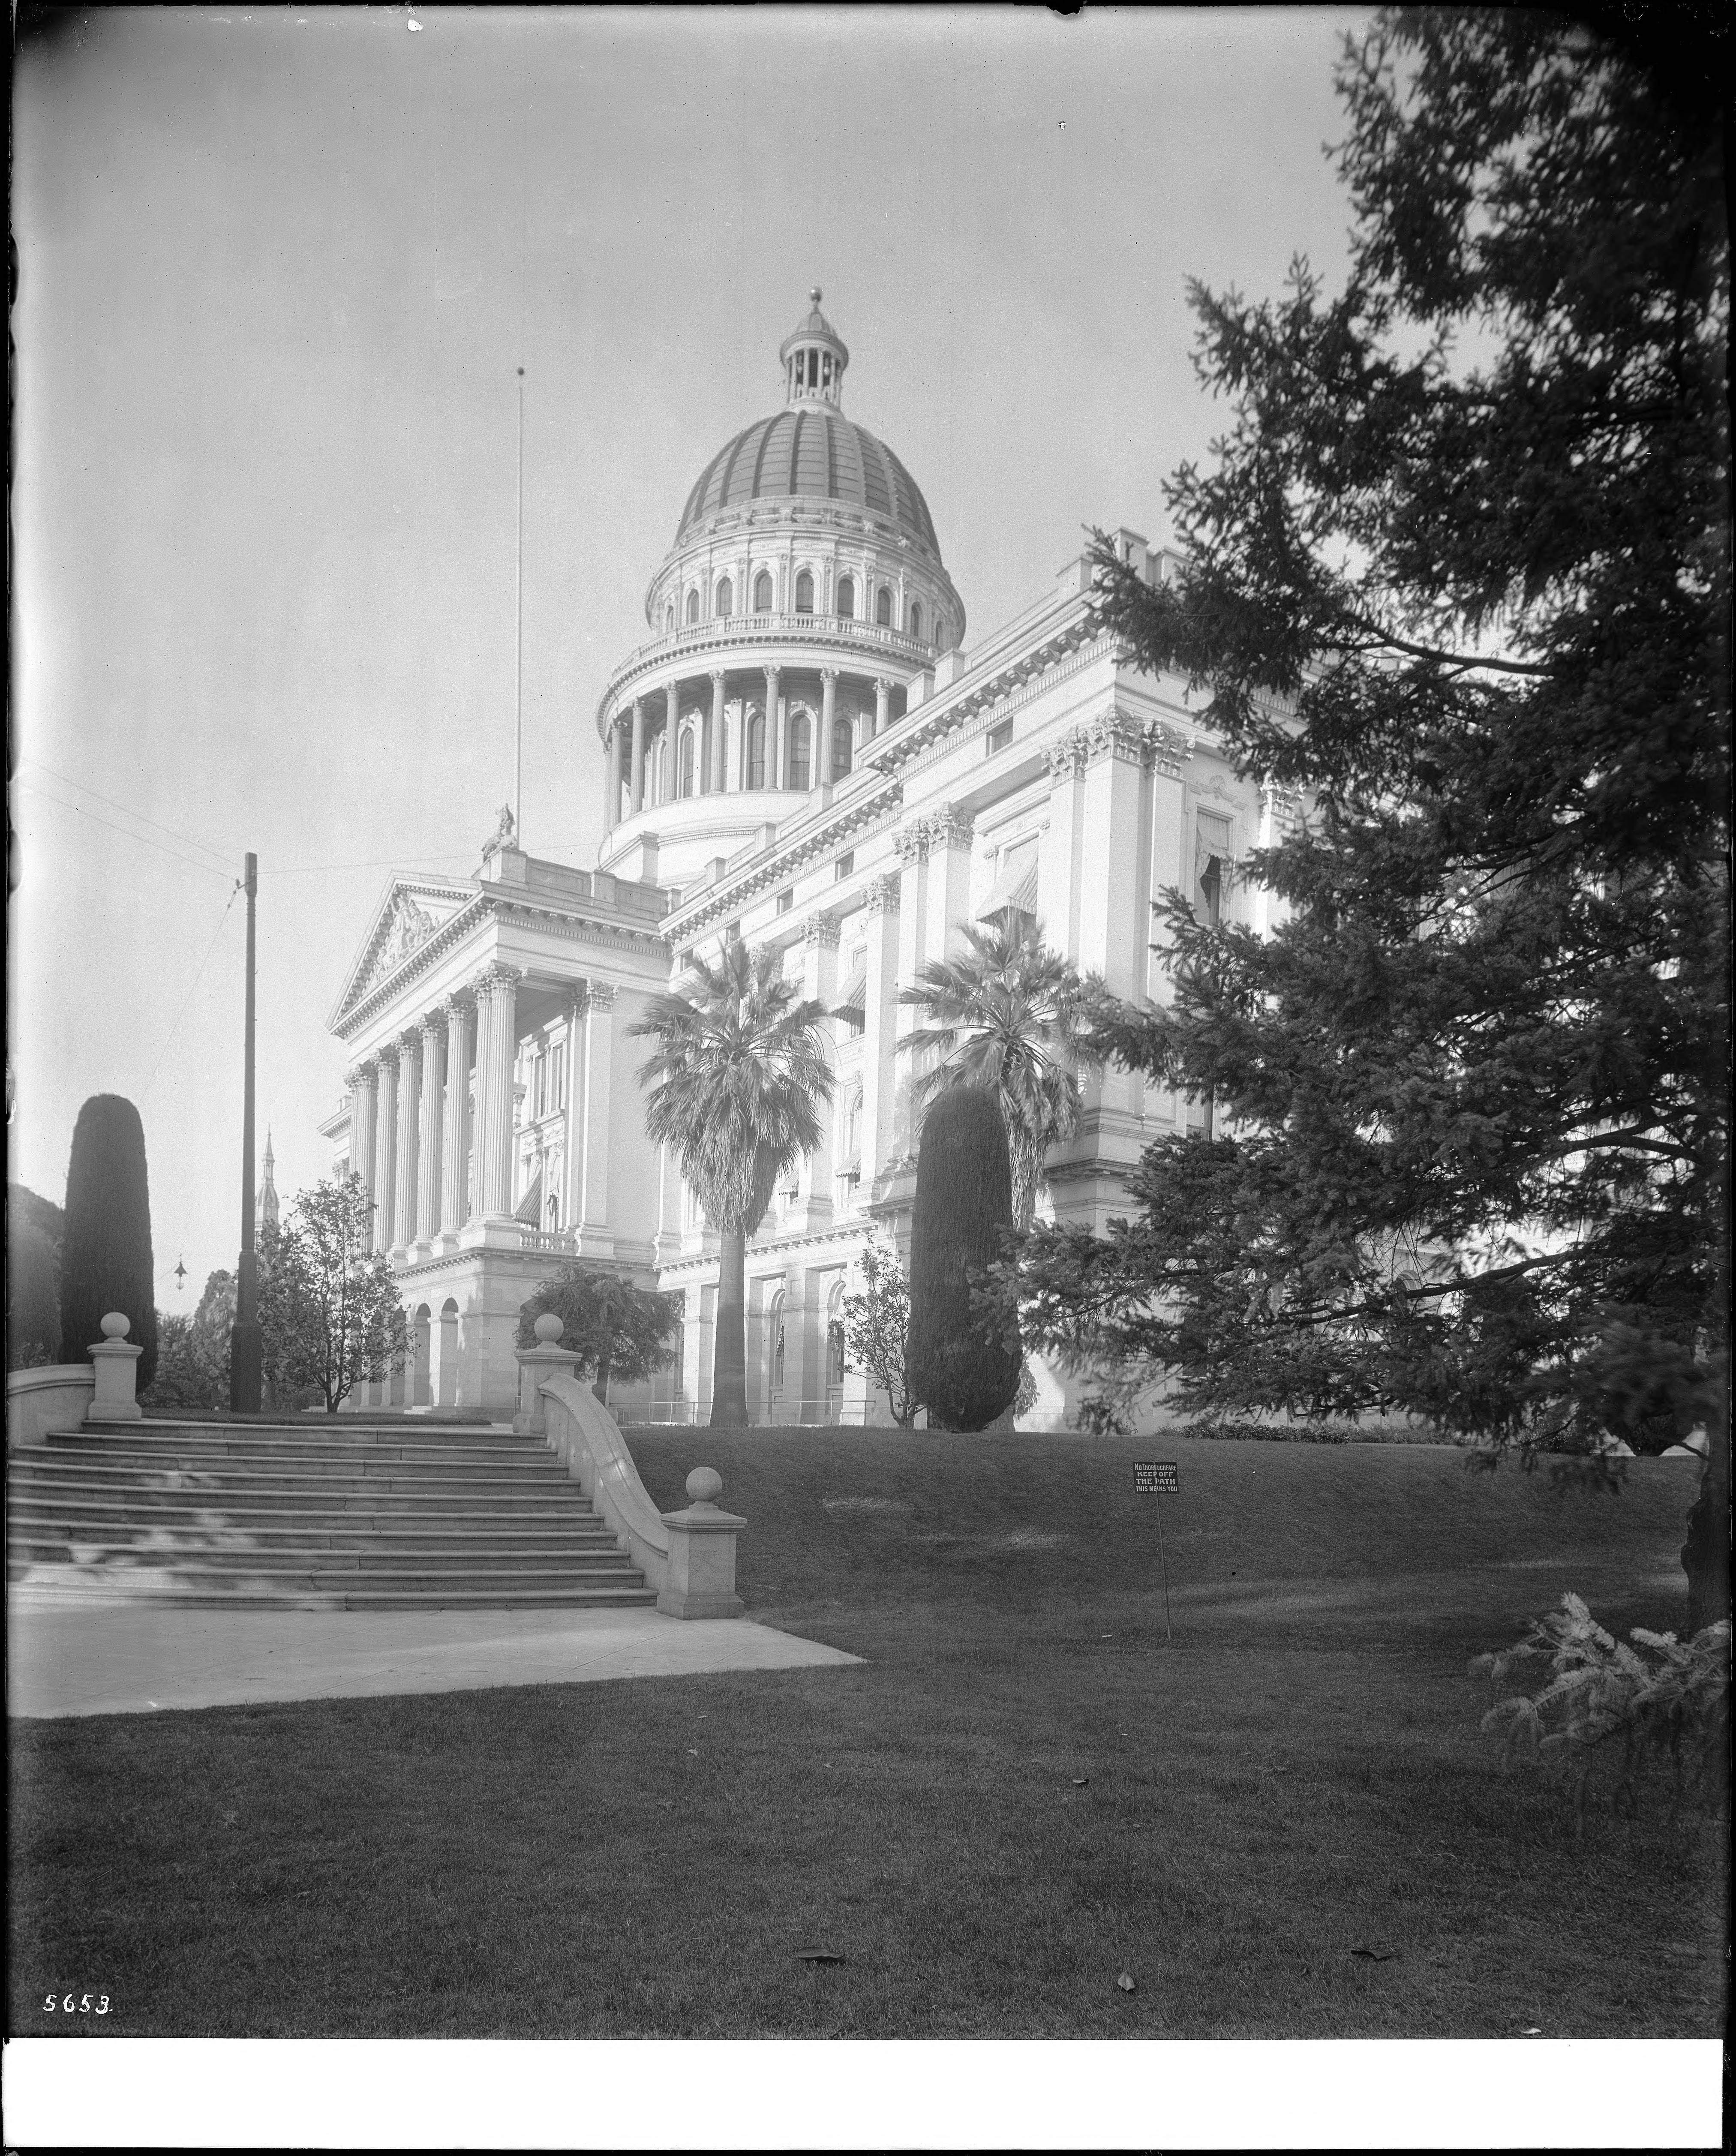 Exterior view of the California state capitol building in Sacramento, ca.1900-1920 (CHS-5653)